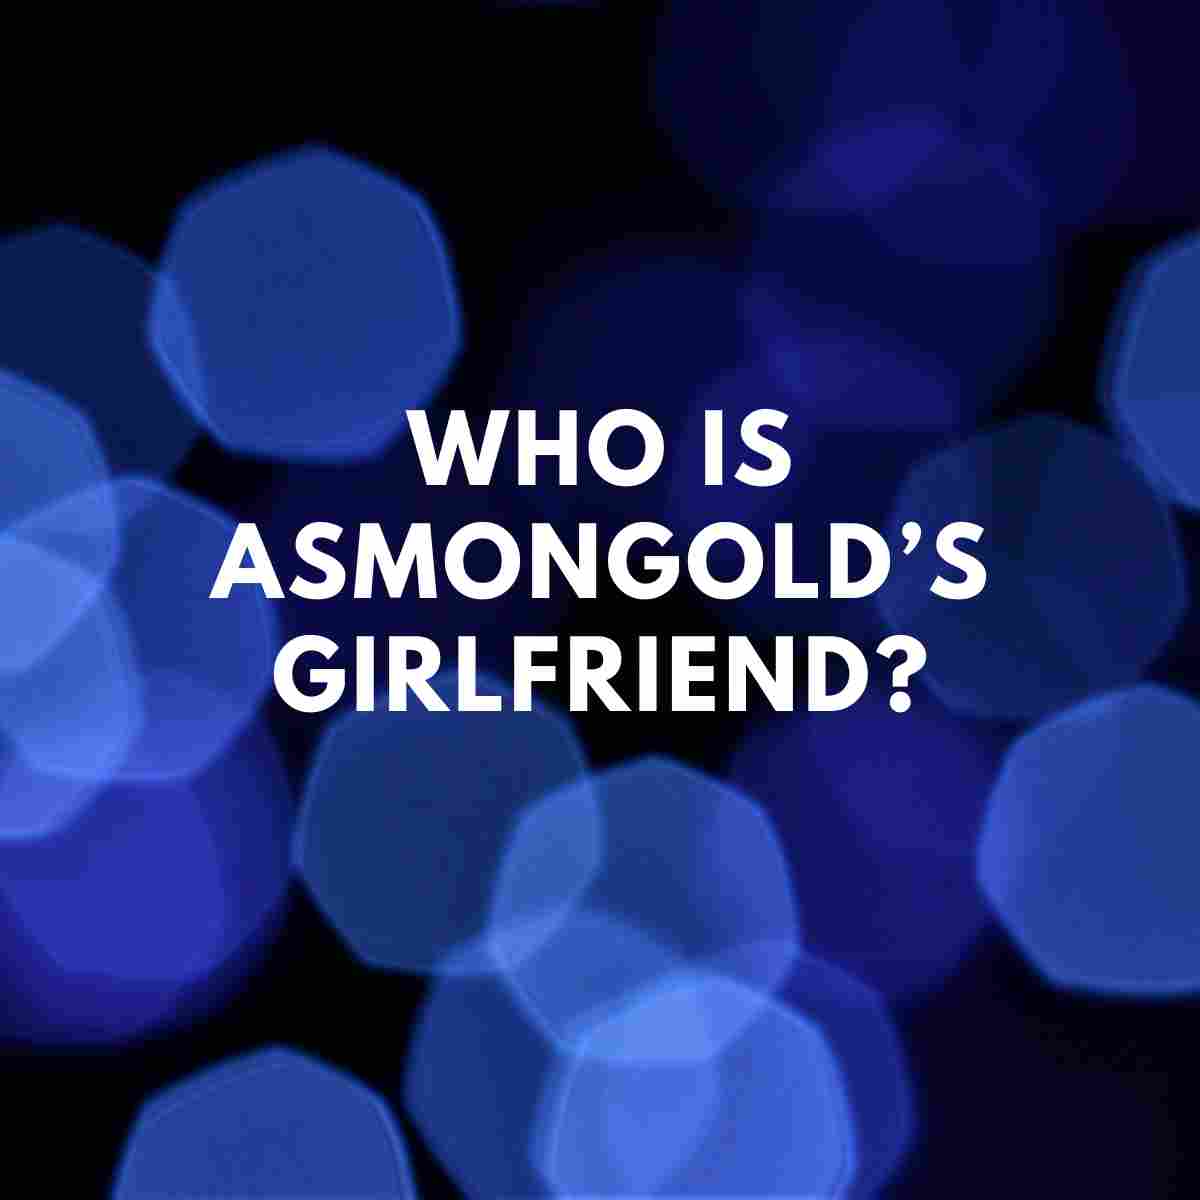 Who is Asmongold’s girlfriend